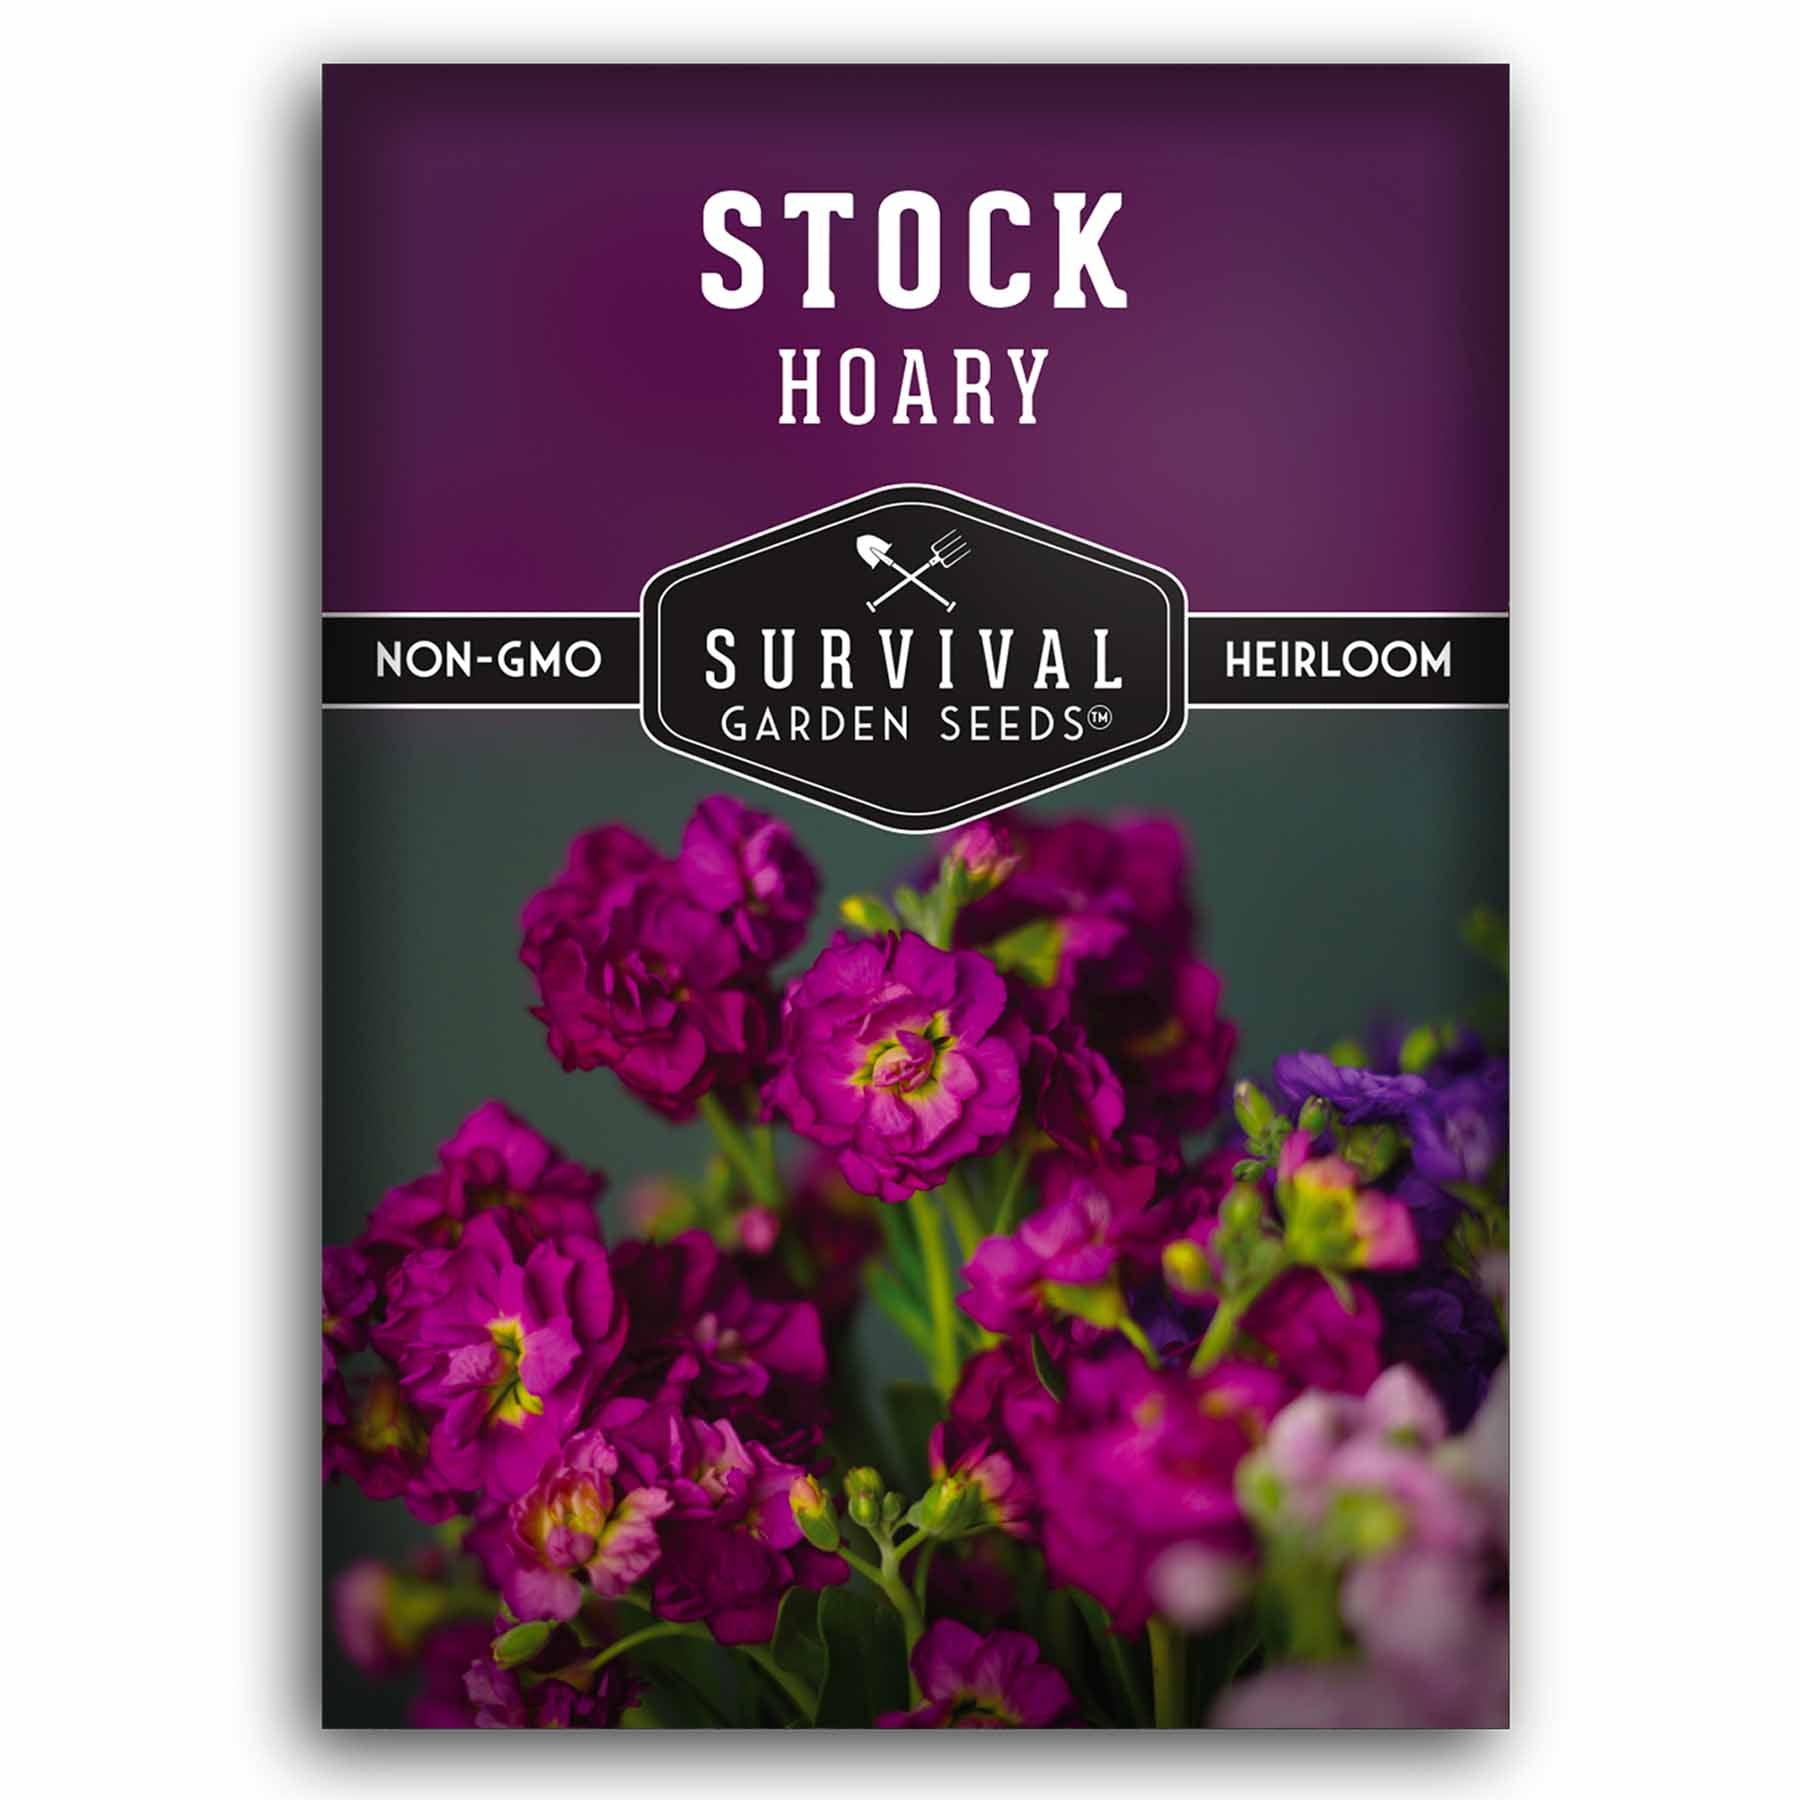 1 packet of Hoary Stock seeds